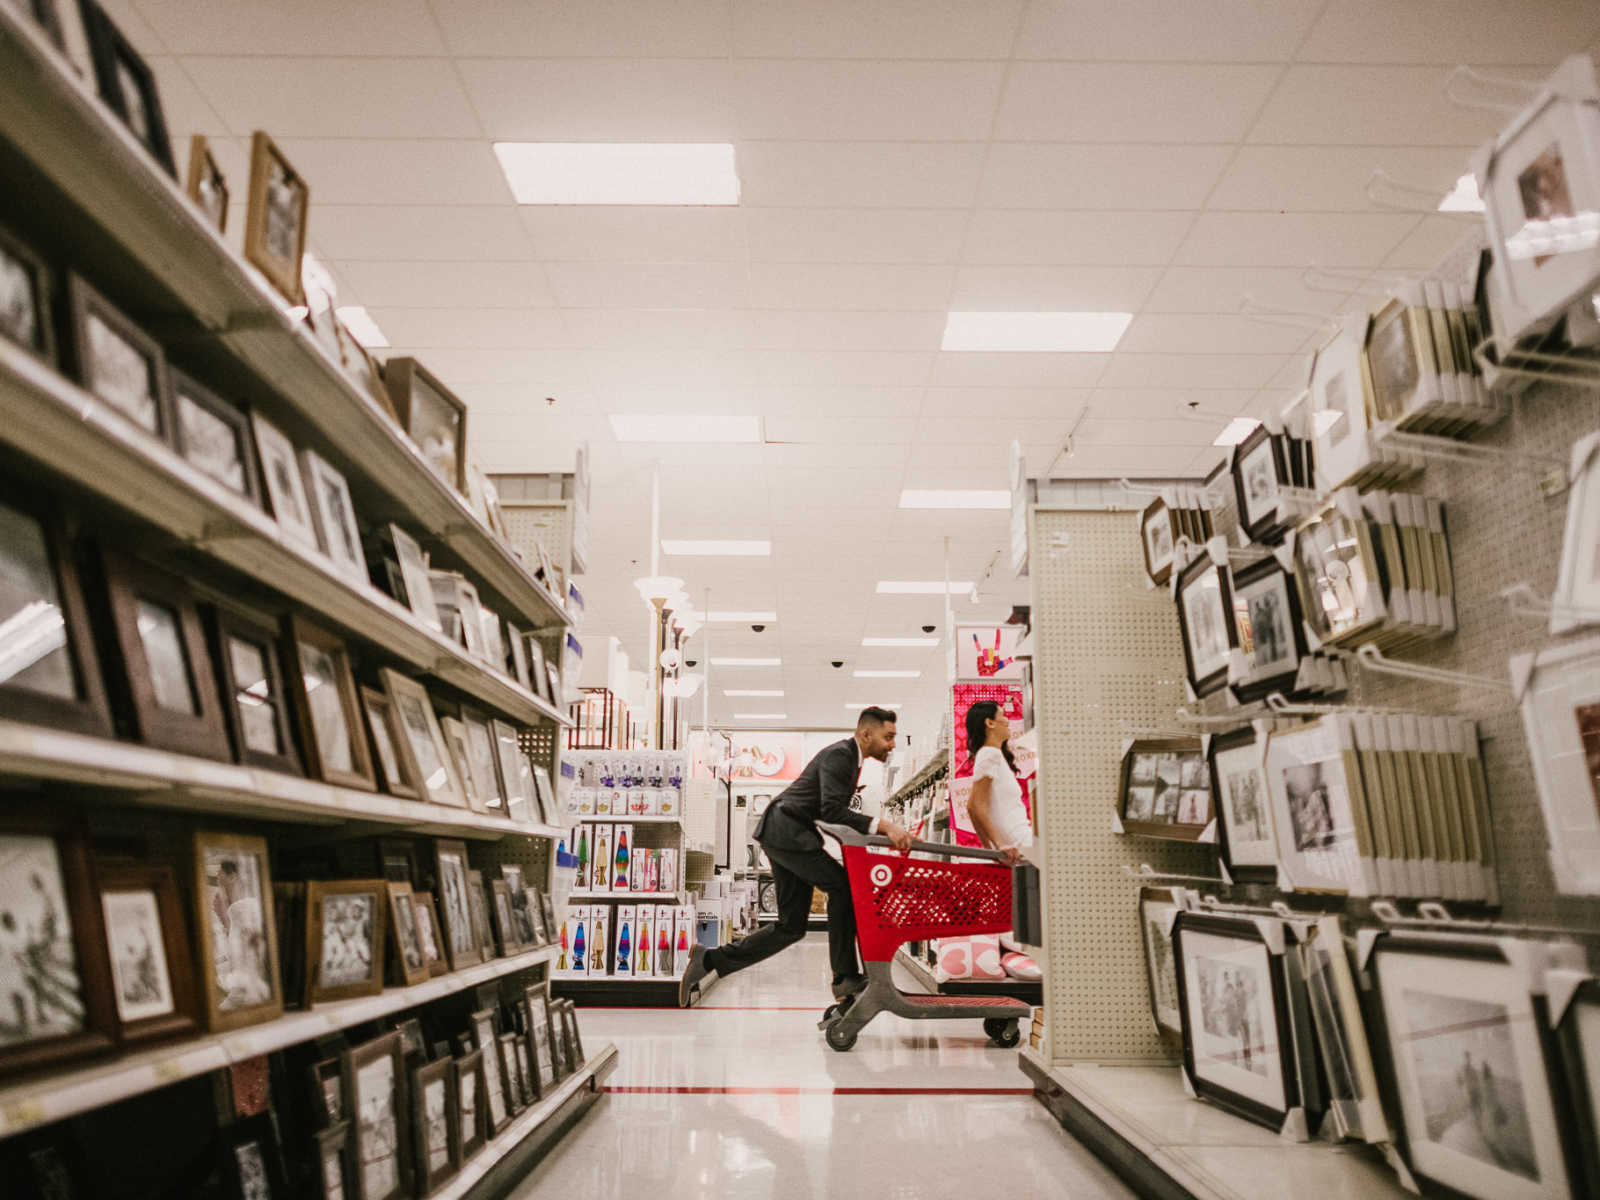 View from picture frame aisle in Target of groom pushing the shopping cart he and his bride are riding